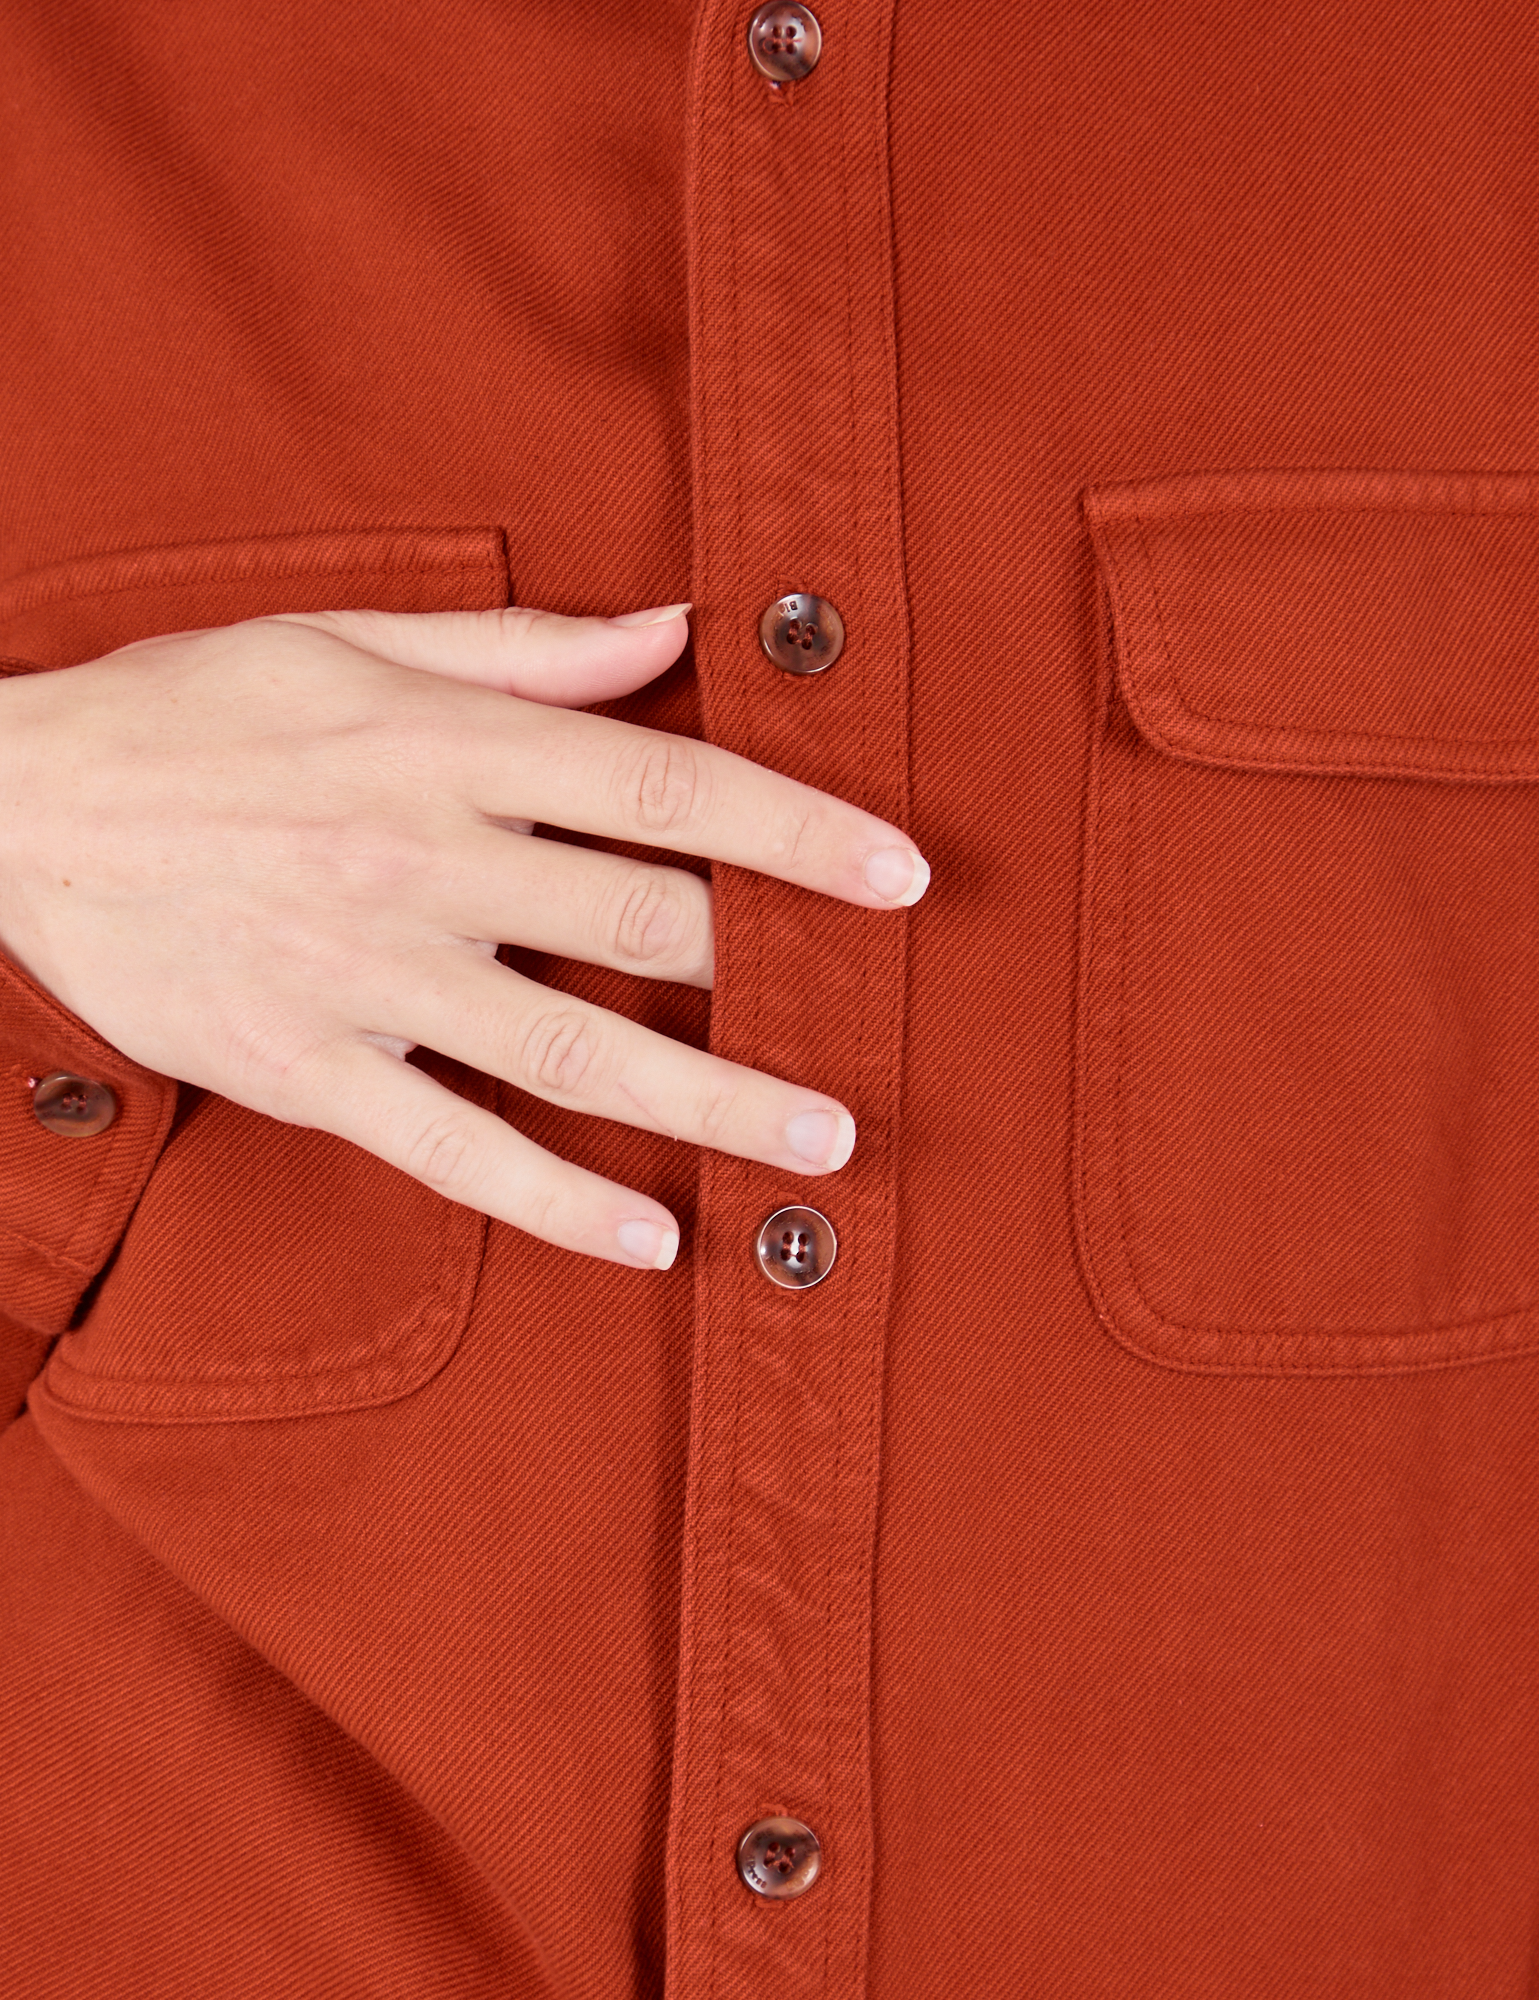 Flannel Overshirt in Paprika button placket close up. Alex has her hand resting on the front.